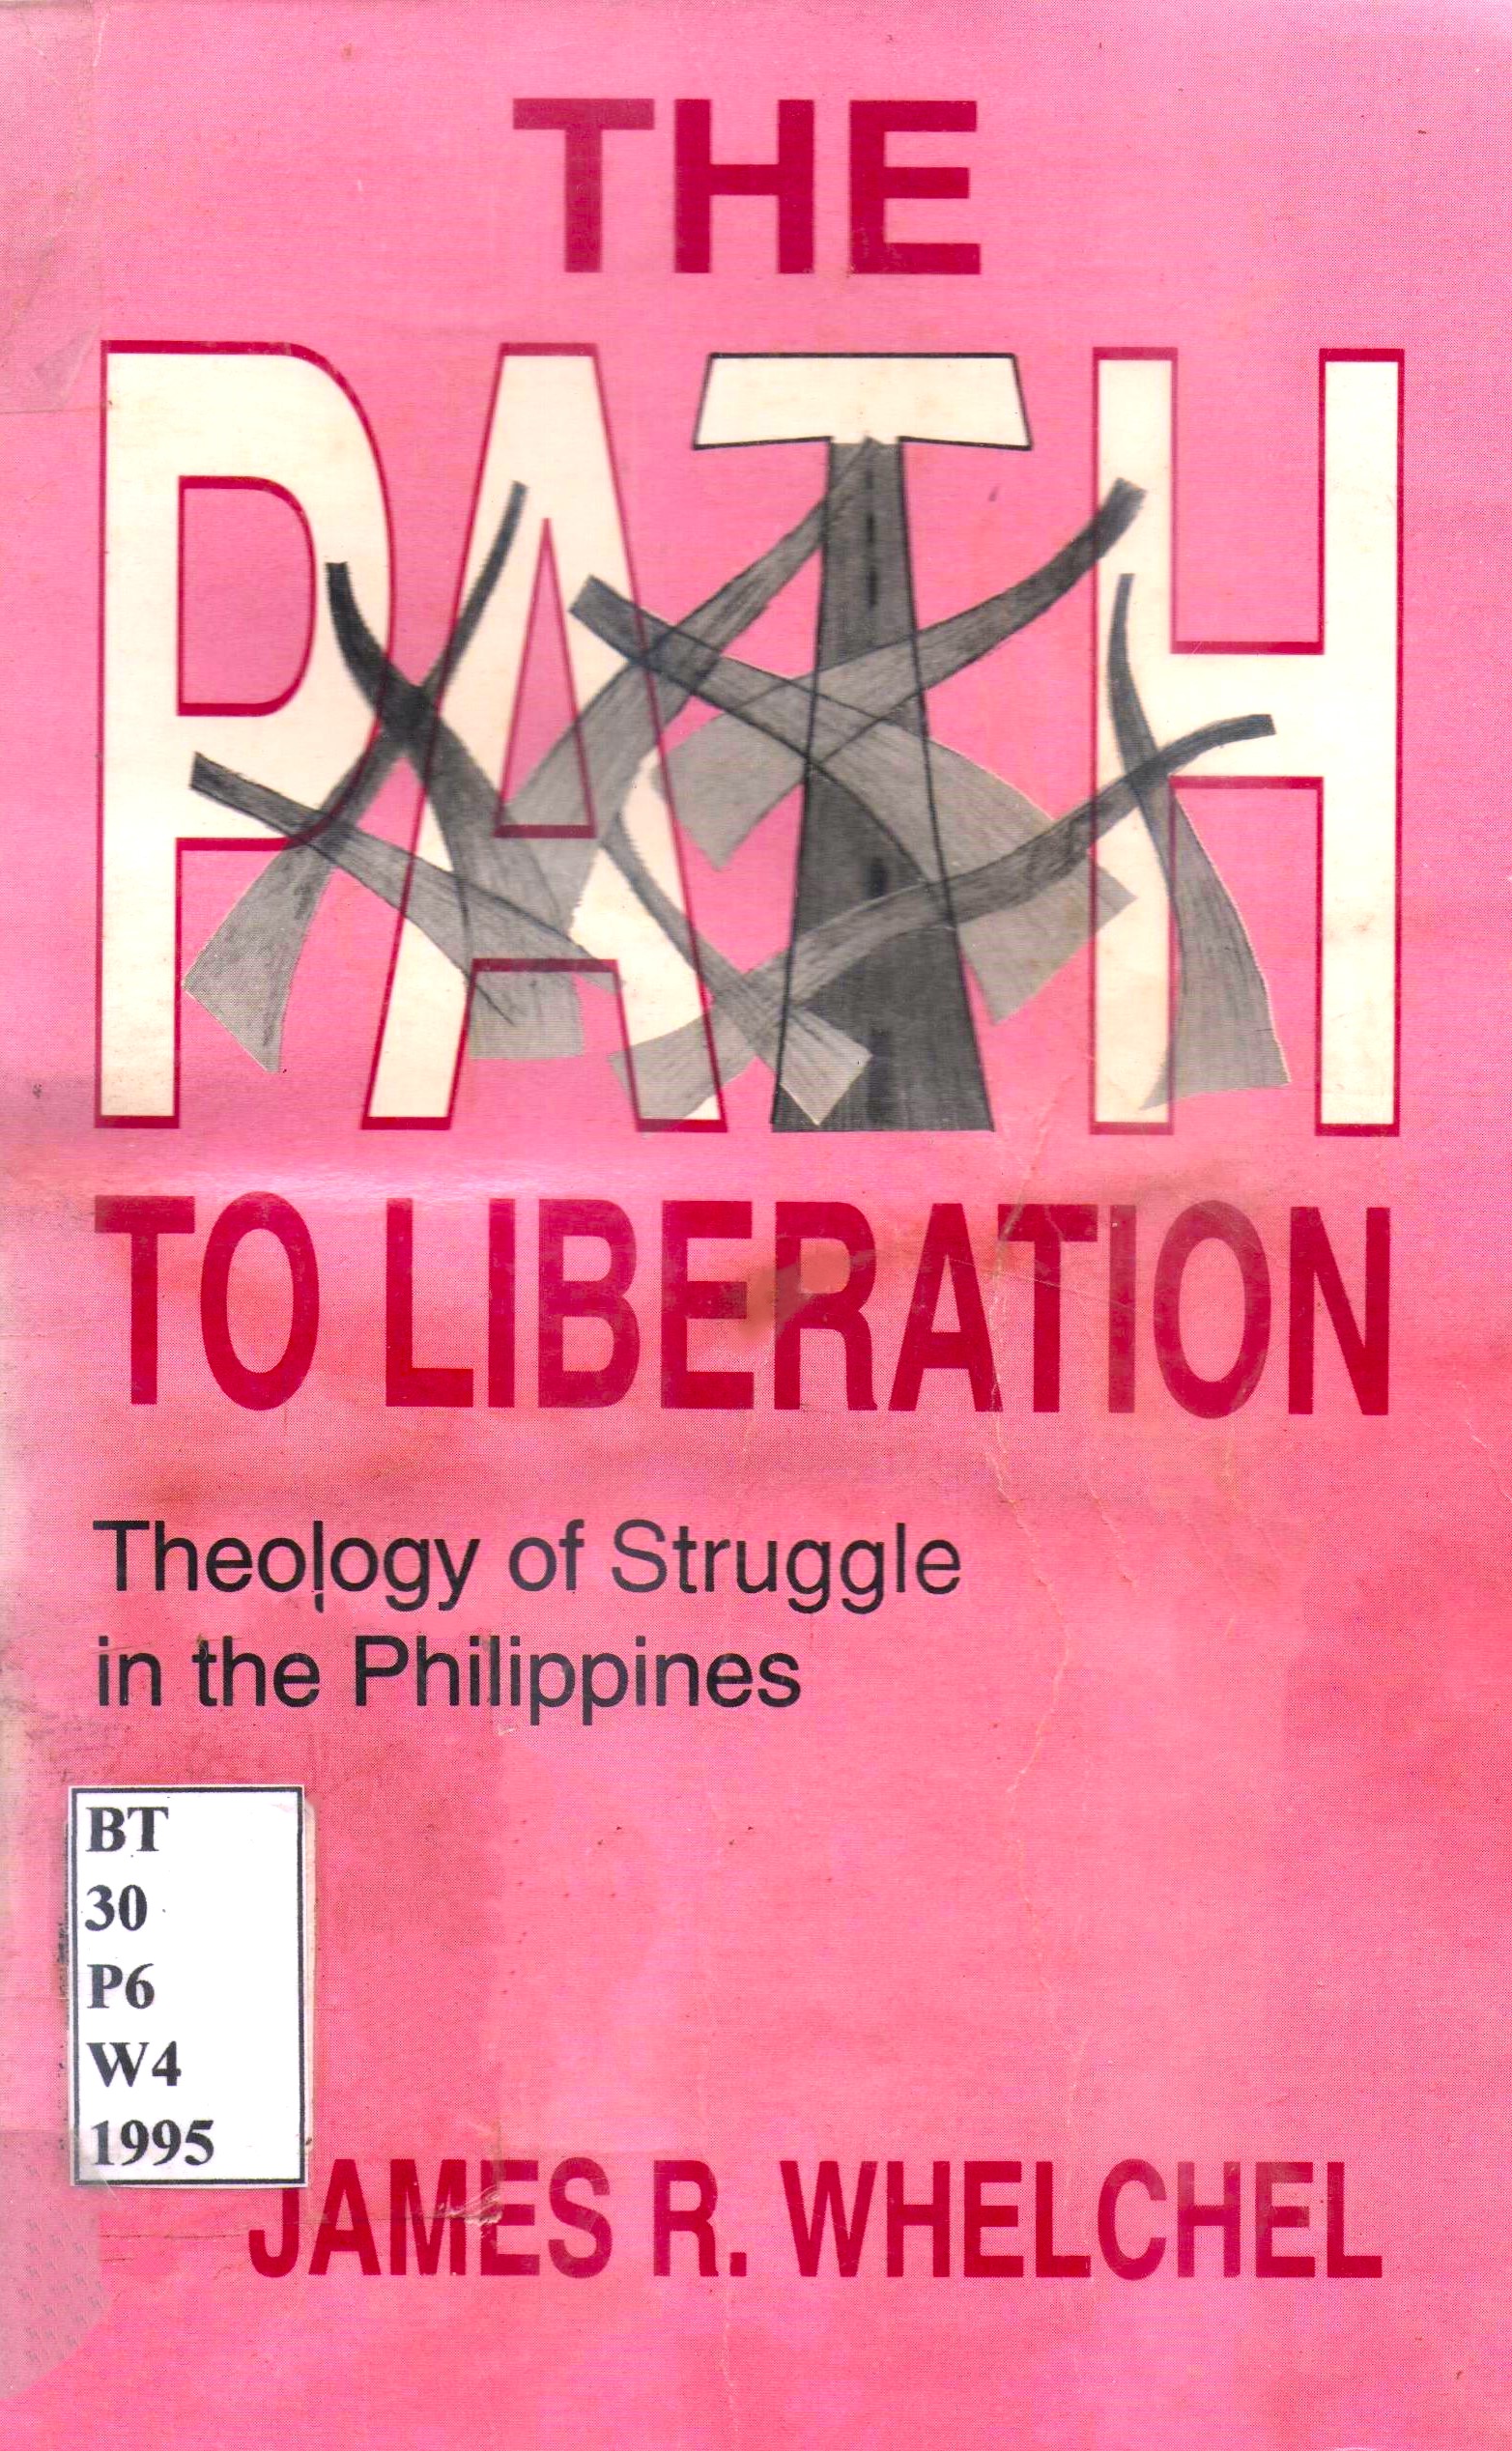 The path to liberation theology of struggle in the Philippines